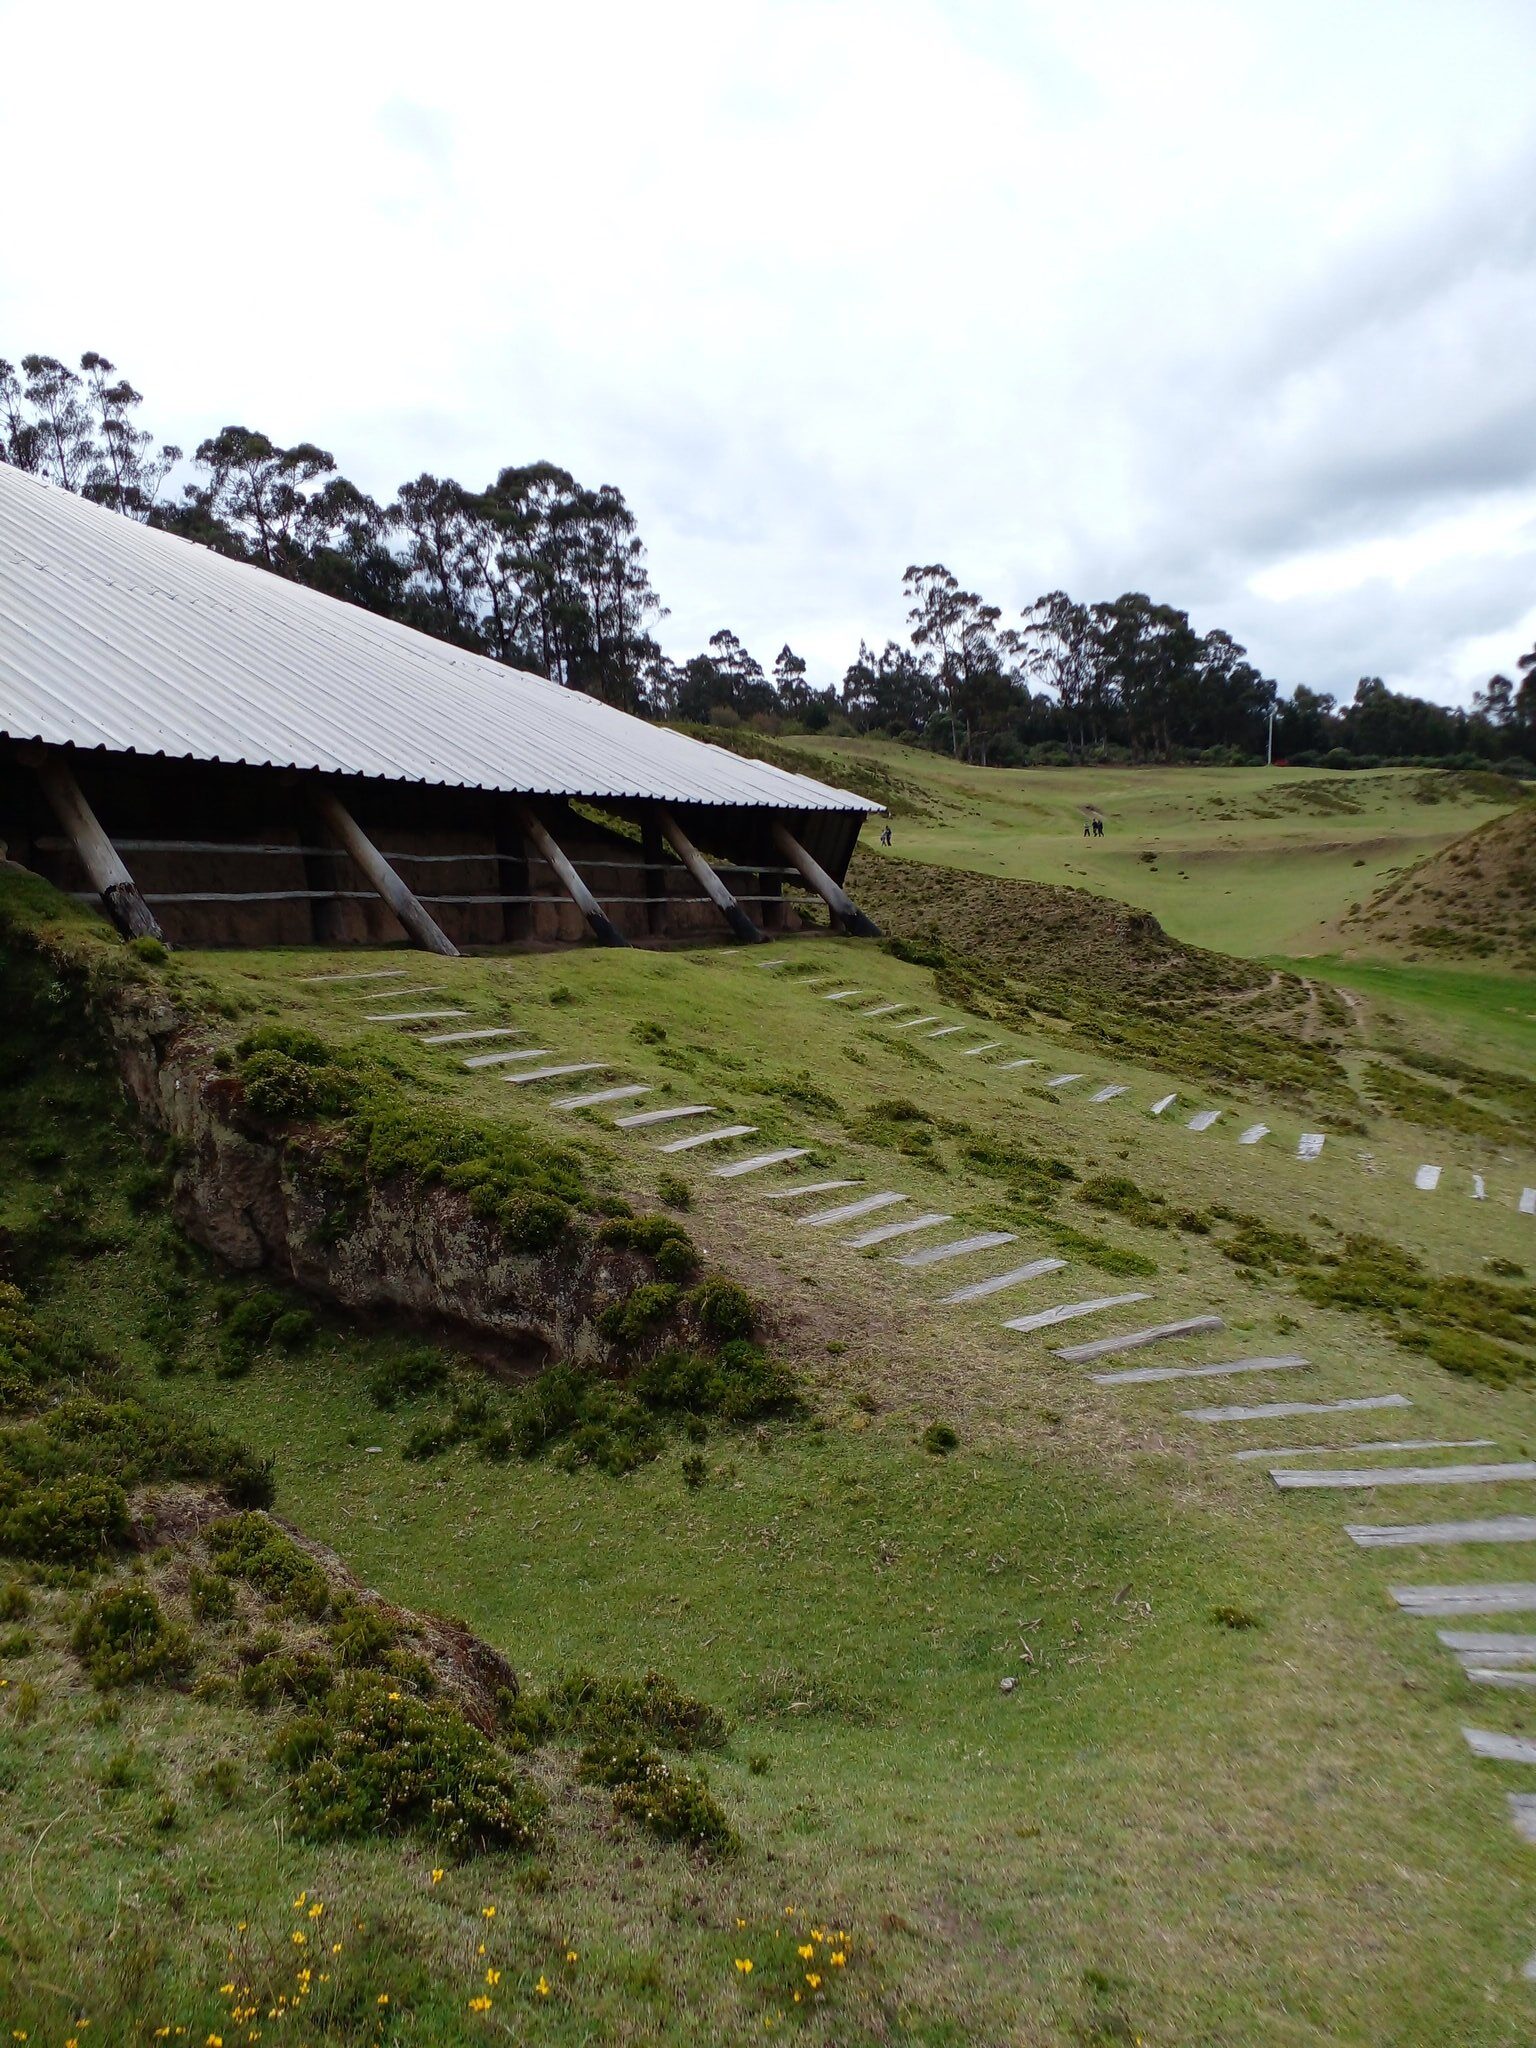 Roof covered pyramid of the Pre-Inca Archeological site of Cochasqui